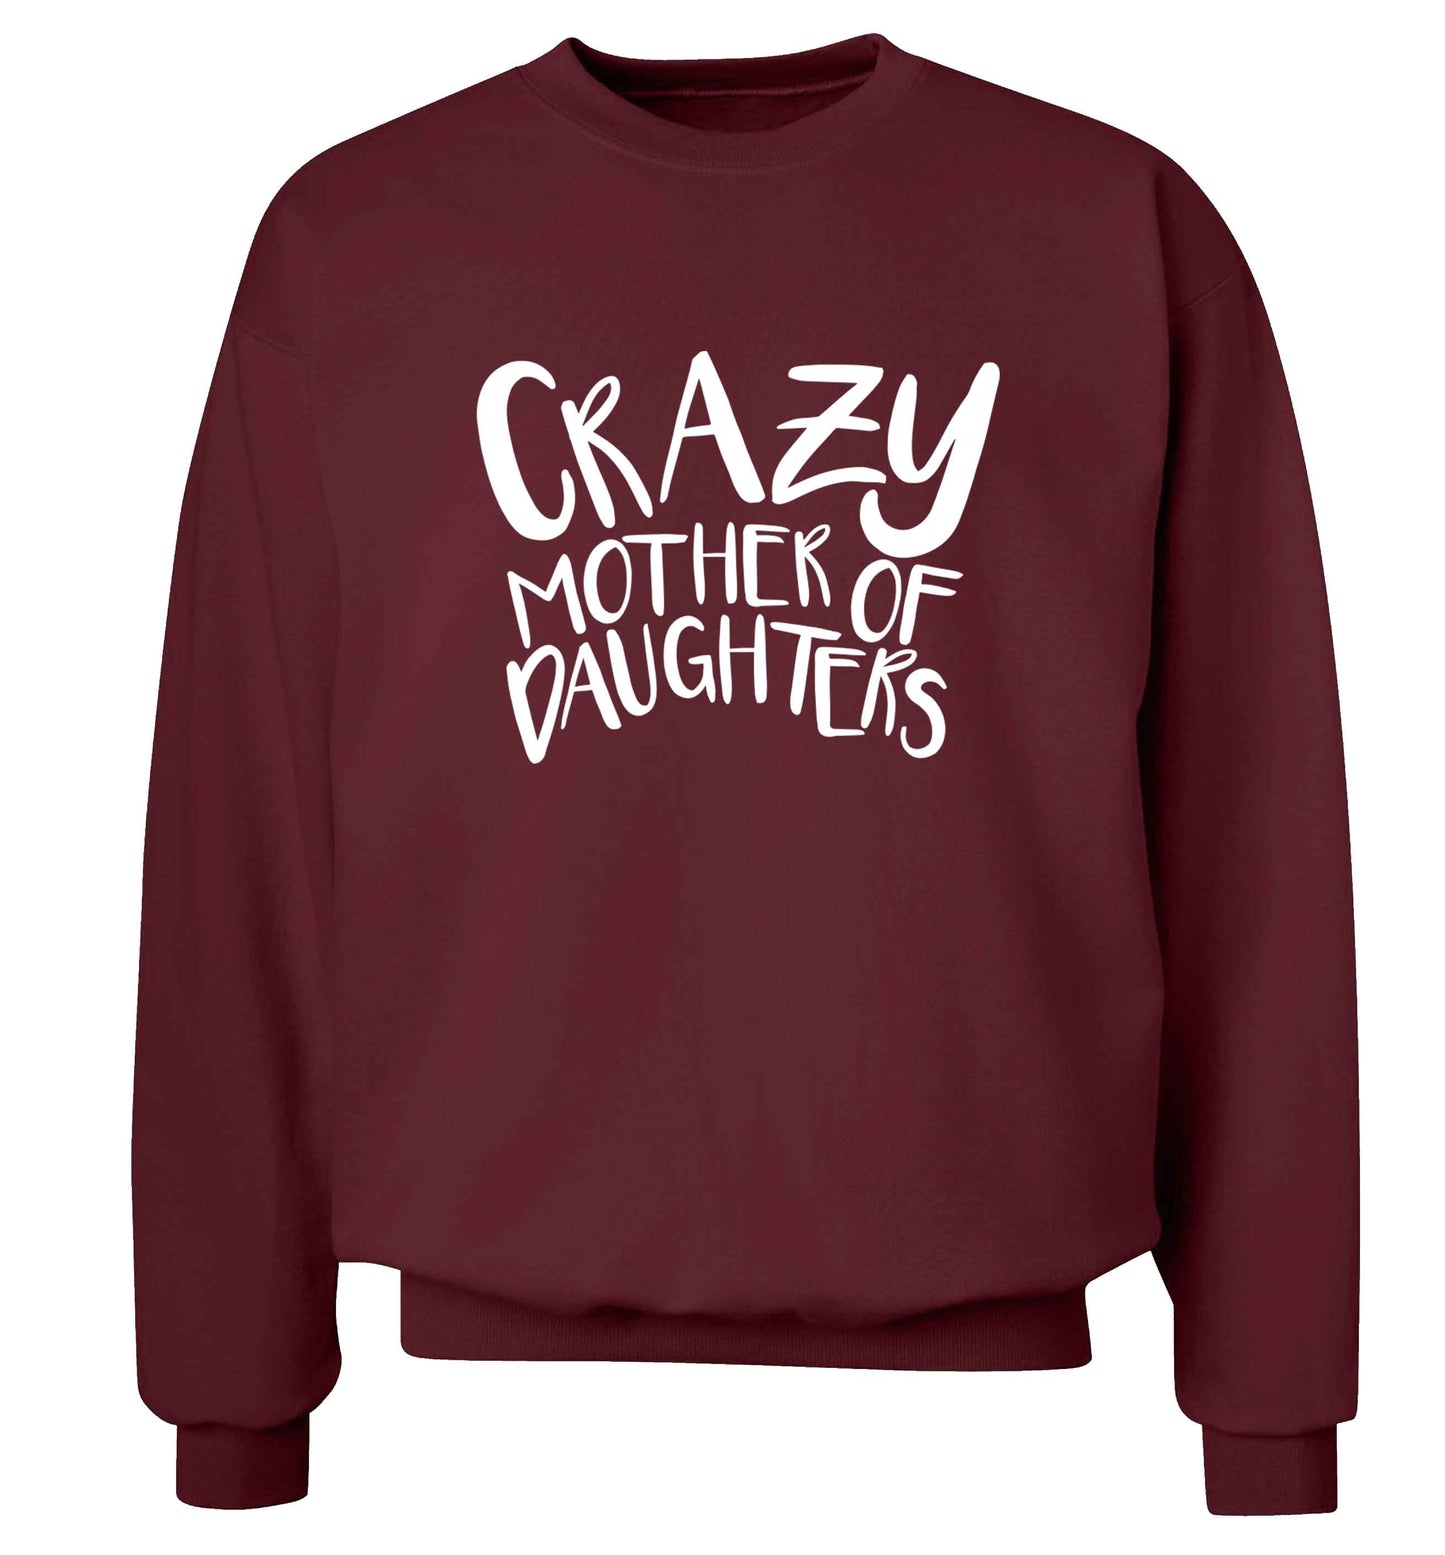 Crazy mother of daughters adult's unisex maroon sweater 2XL